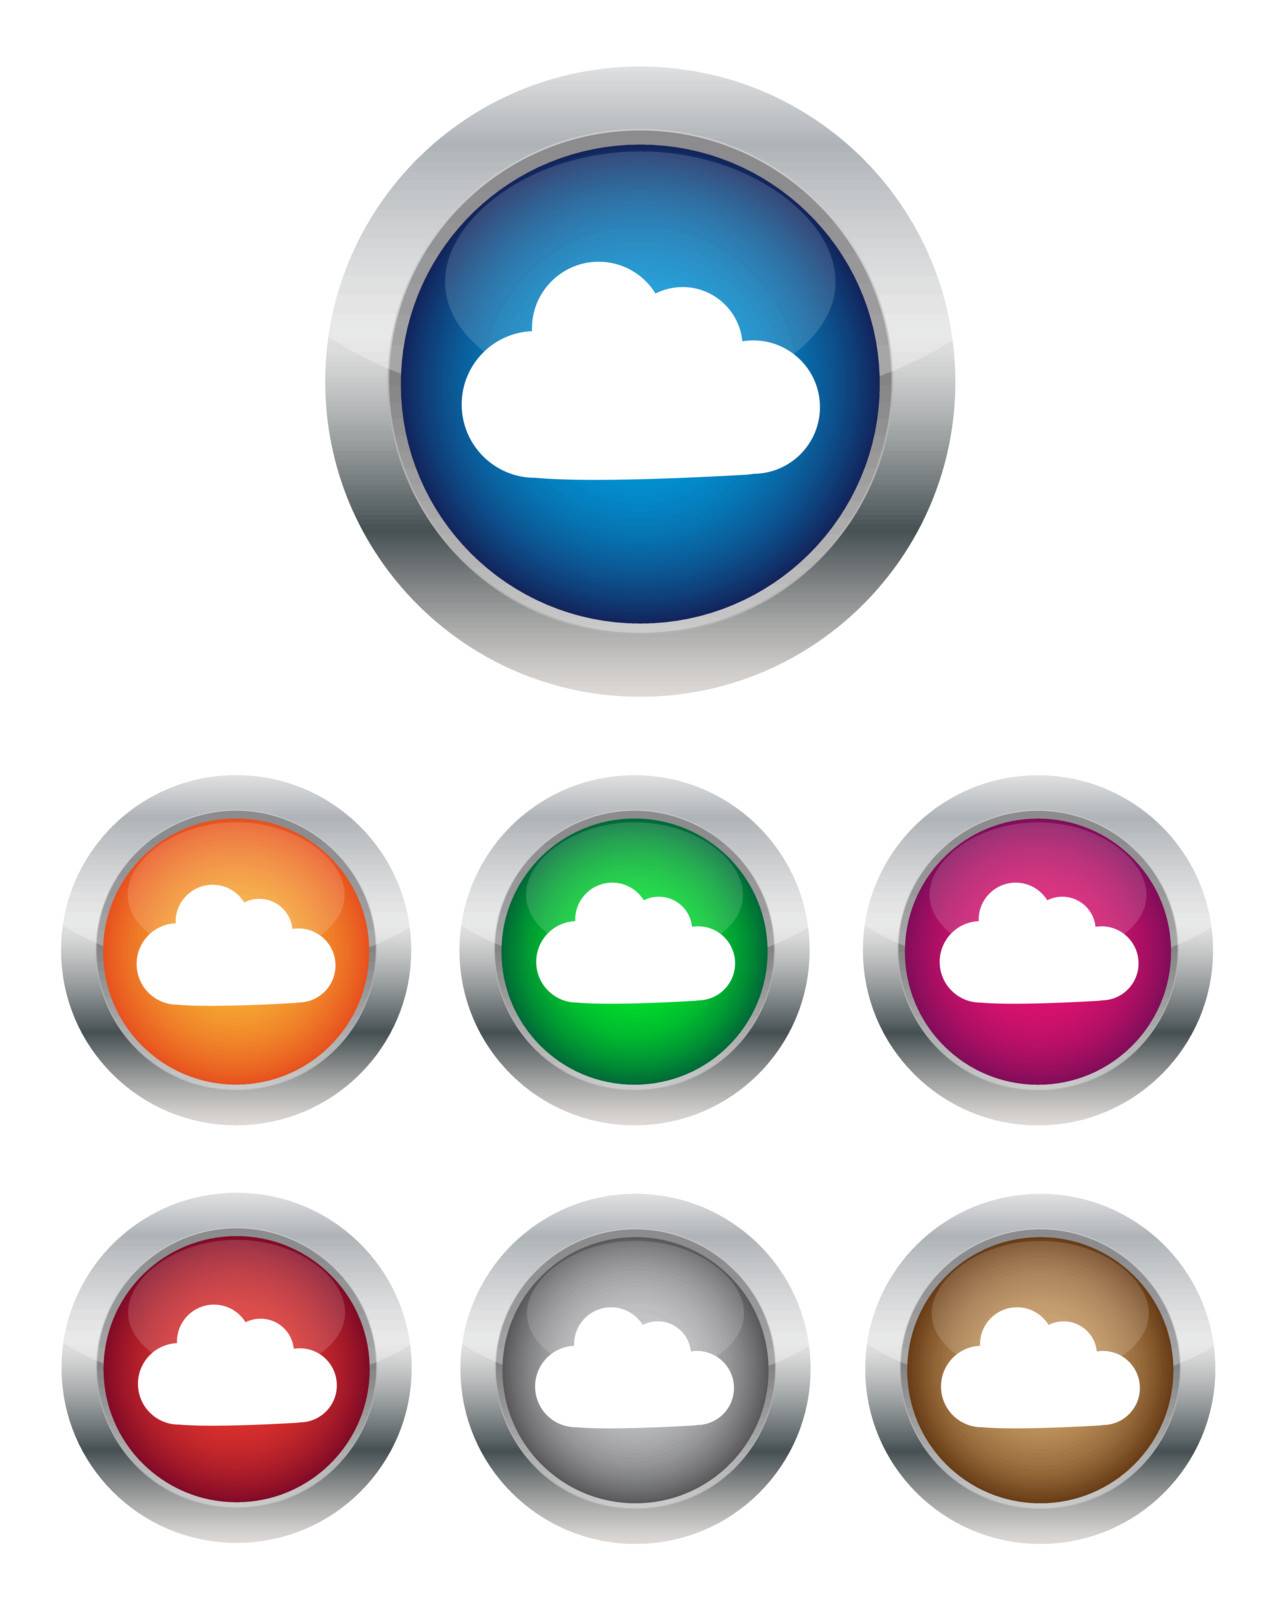 Cloud buttons by simo988